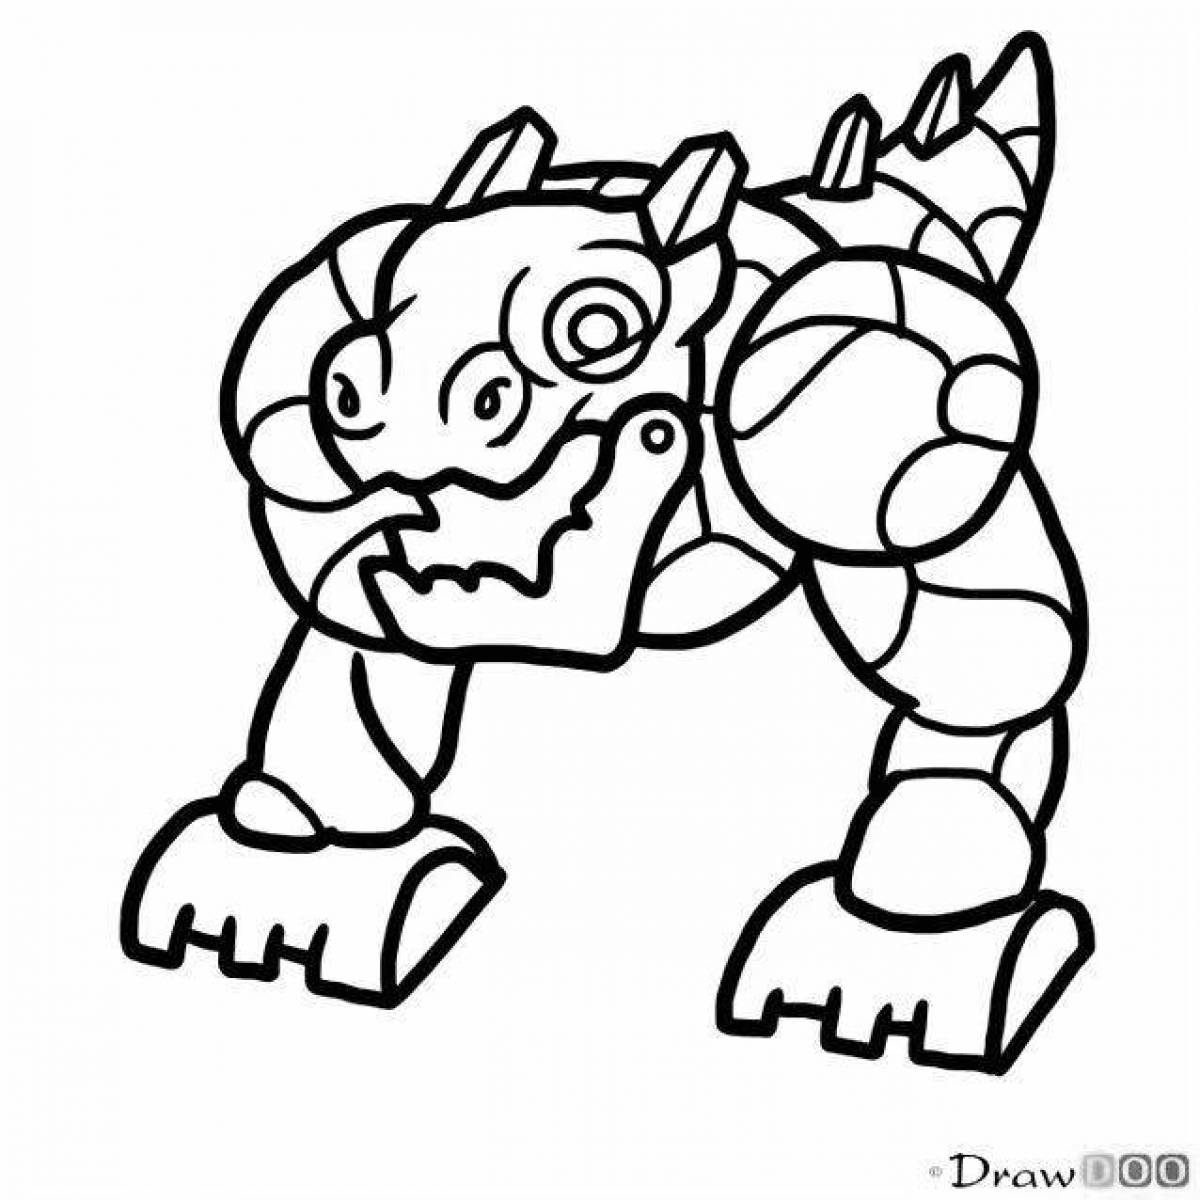 Amazing singing monsters coloring pages for kids